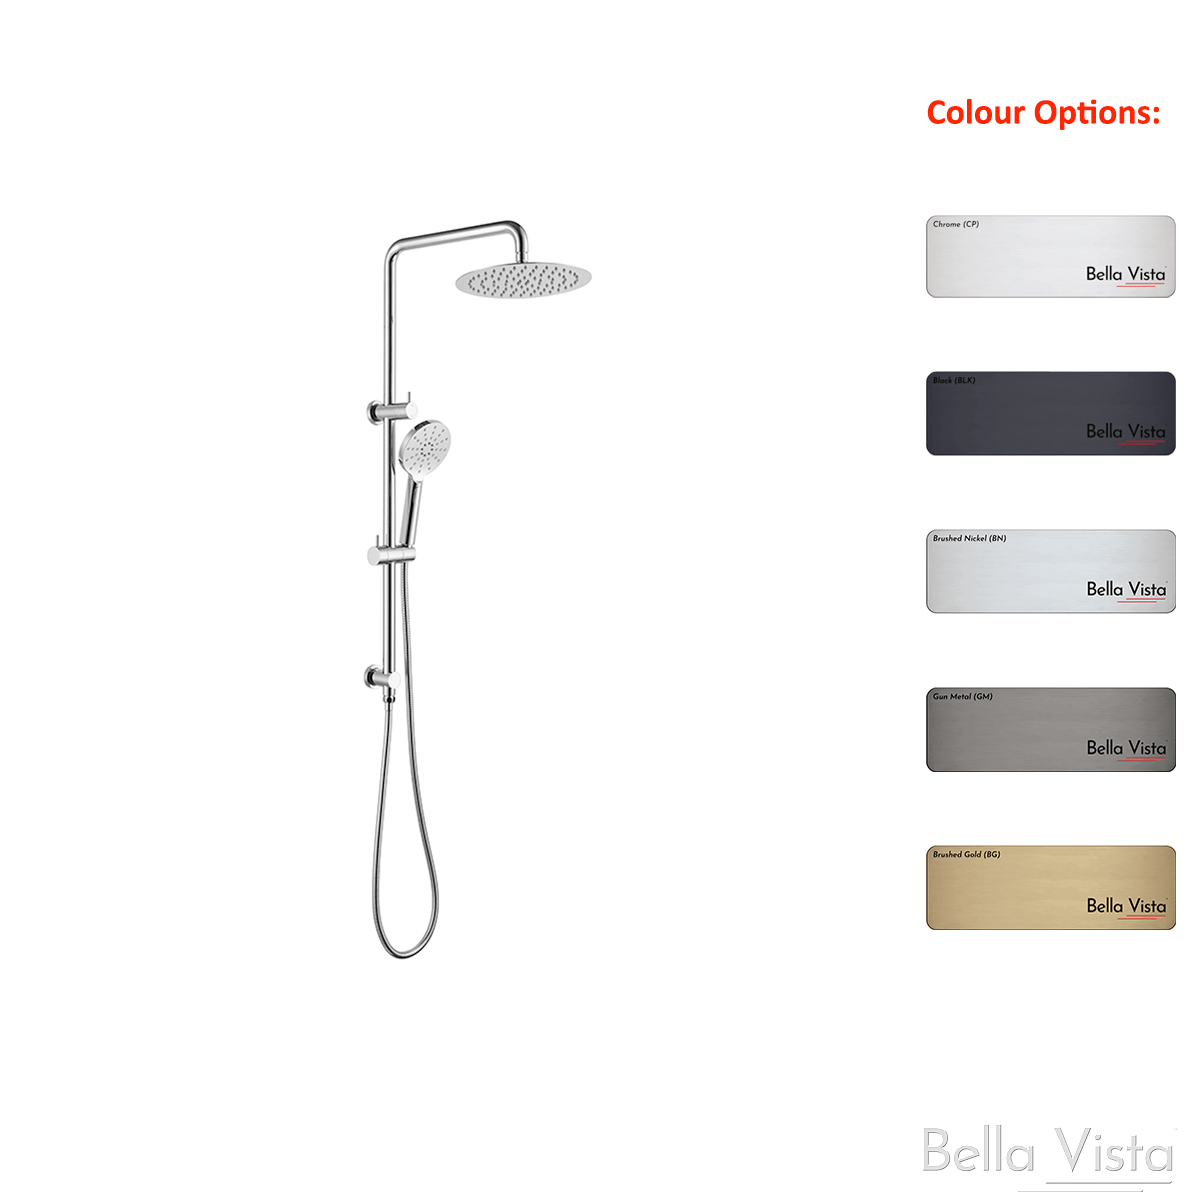 Premium Round shower set with various colors from Infinity Plus bathrooms in Melbourne